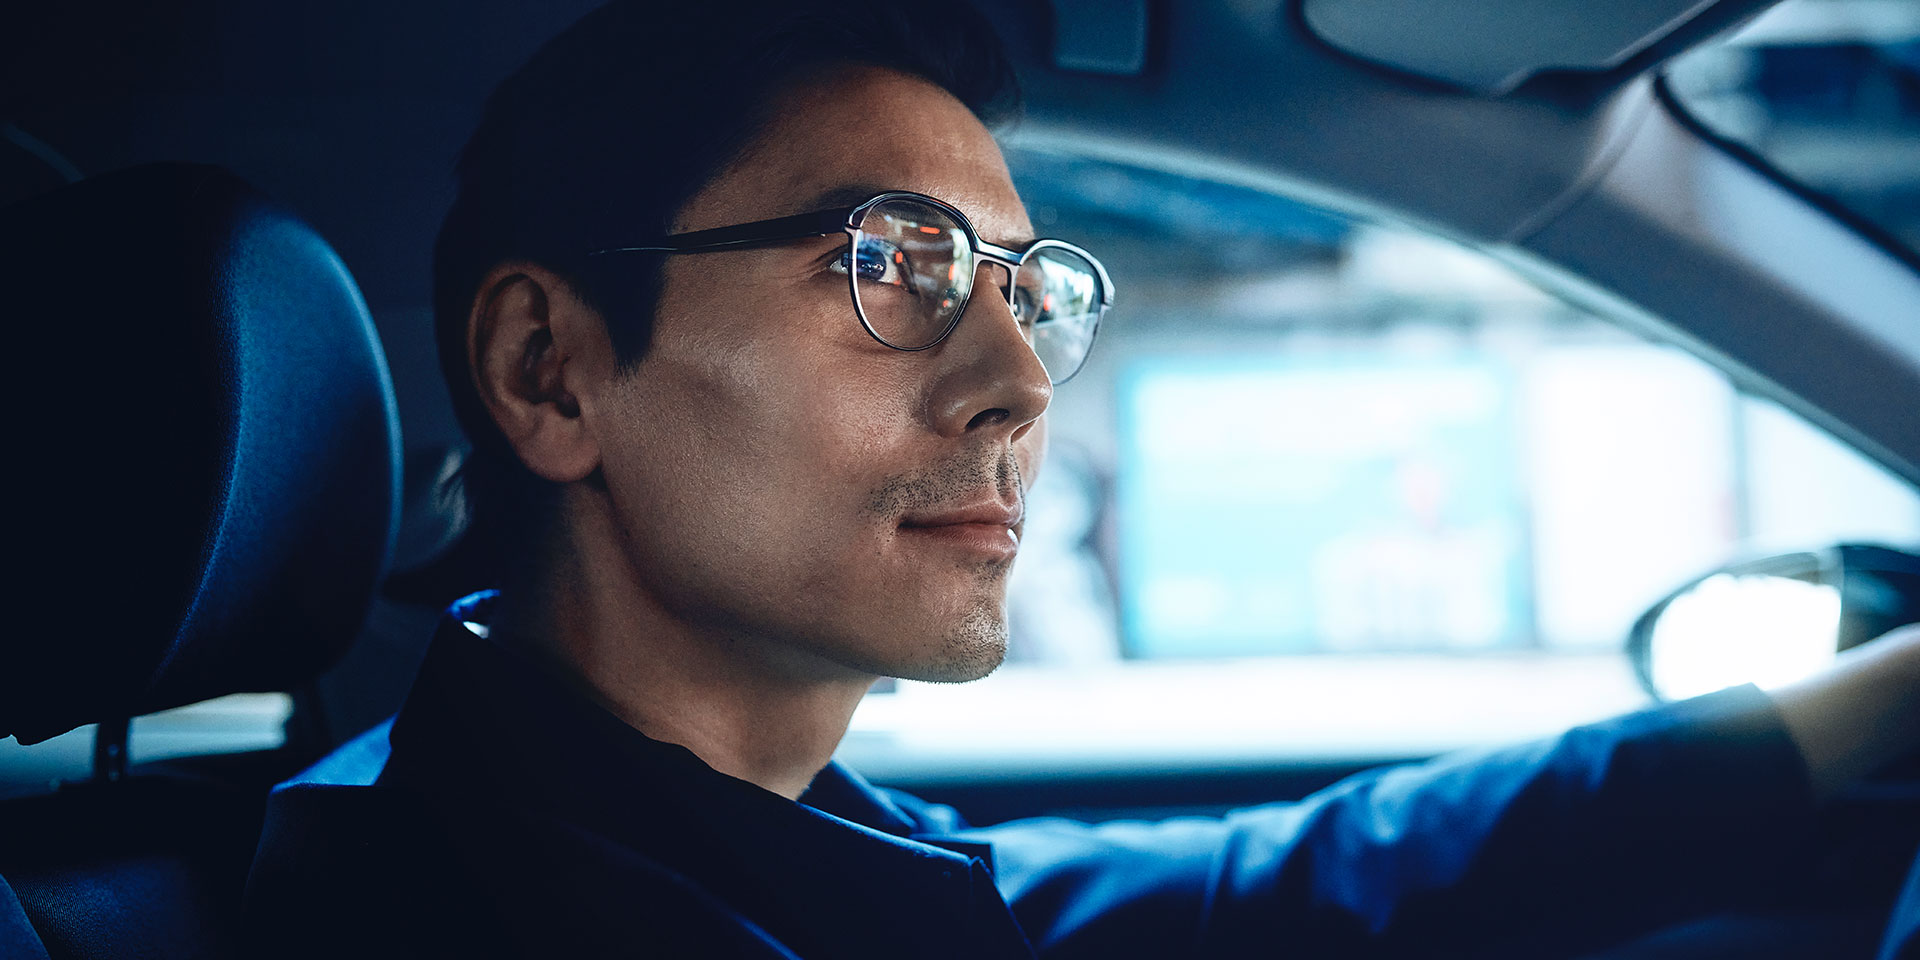 Man driving a car, looking self-confident with a slight smile on the road. He wears ZEISS DriveSafe single vision lenses.